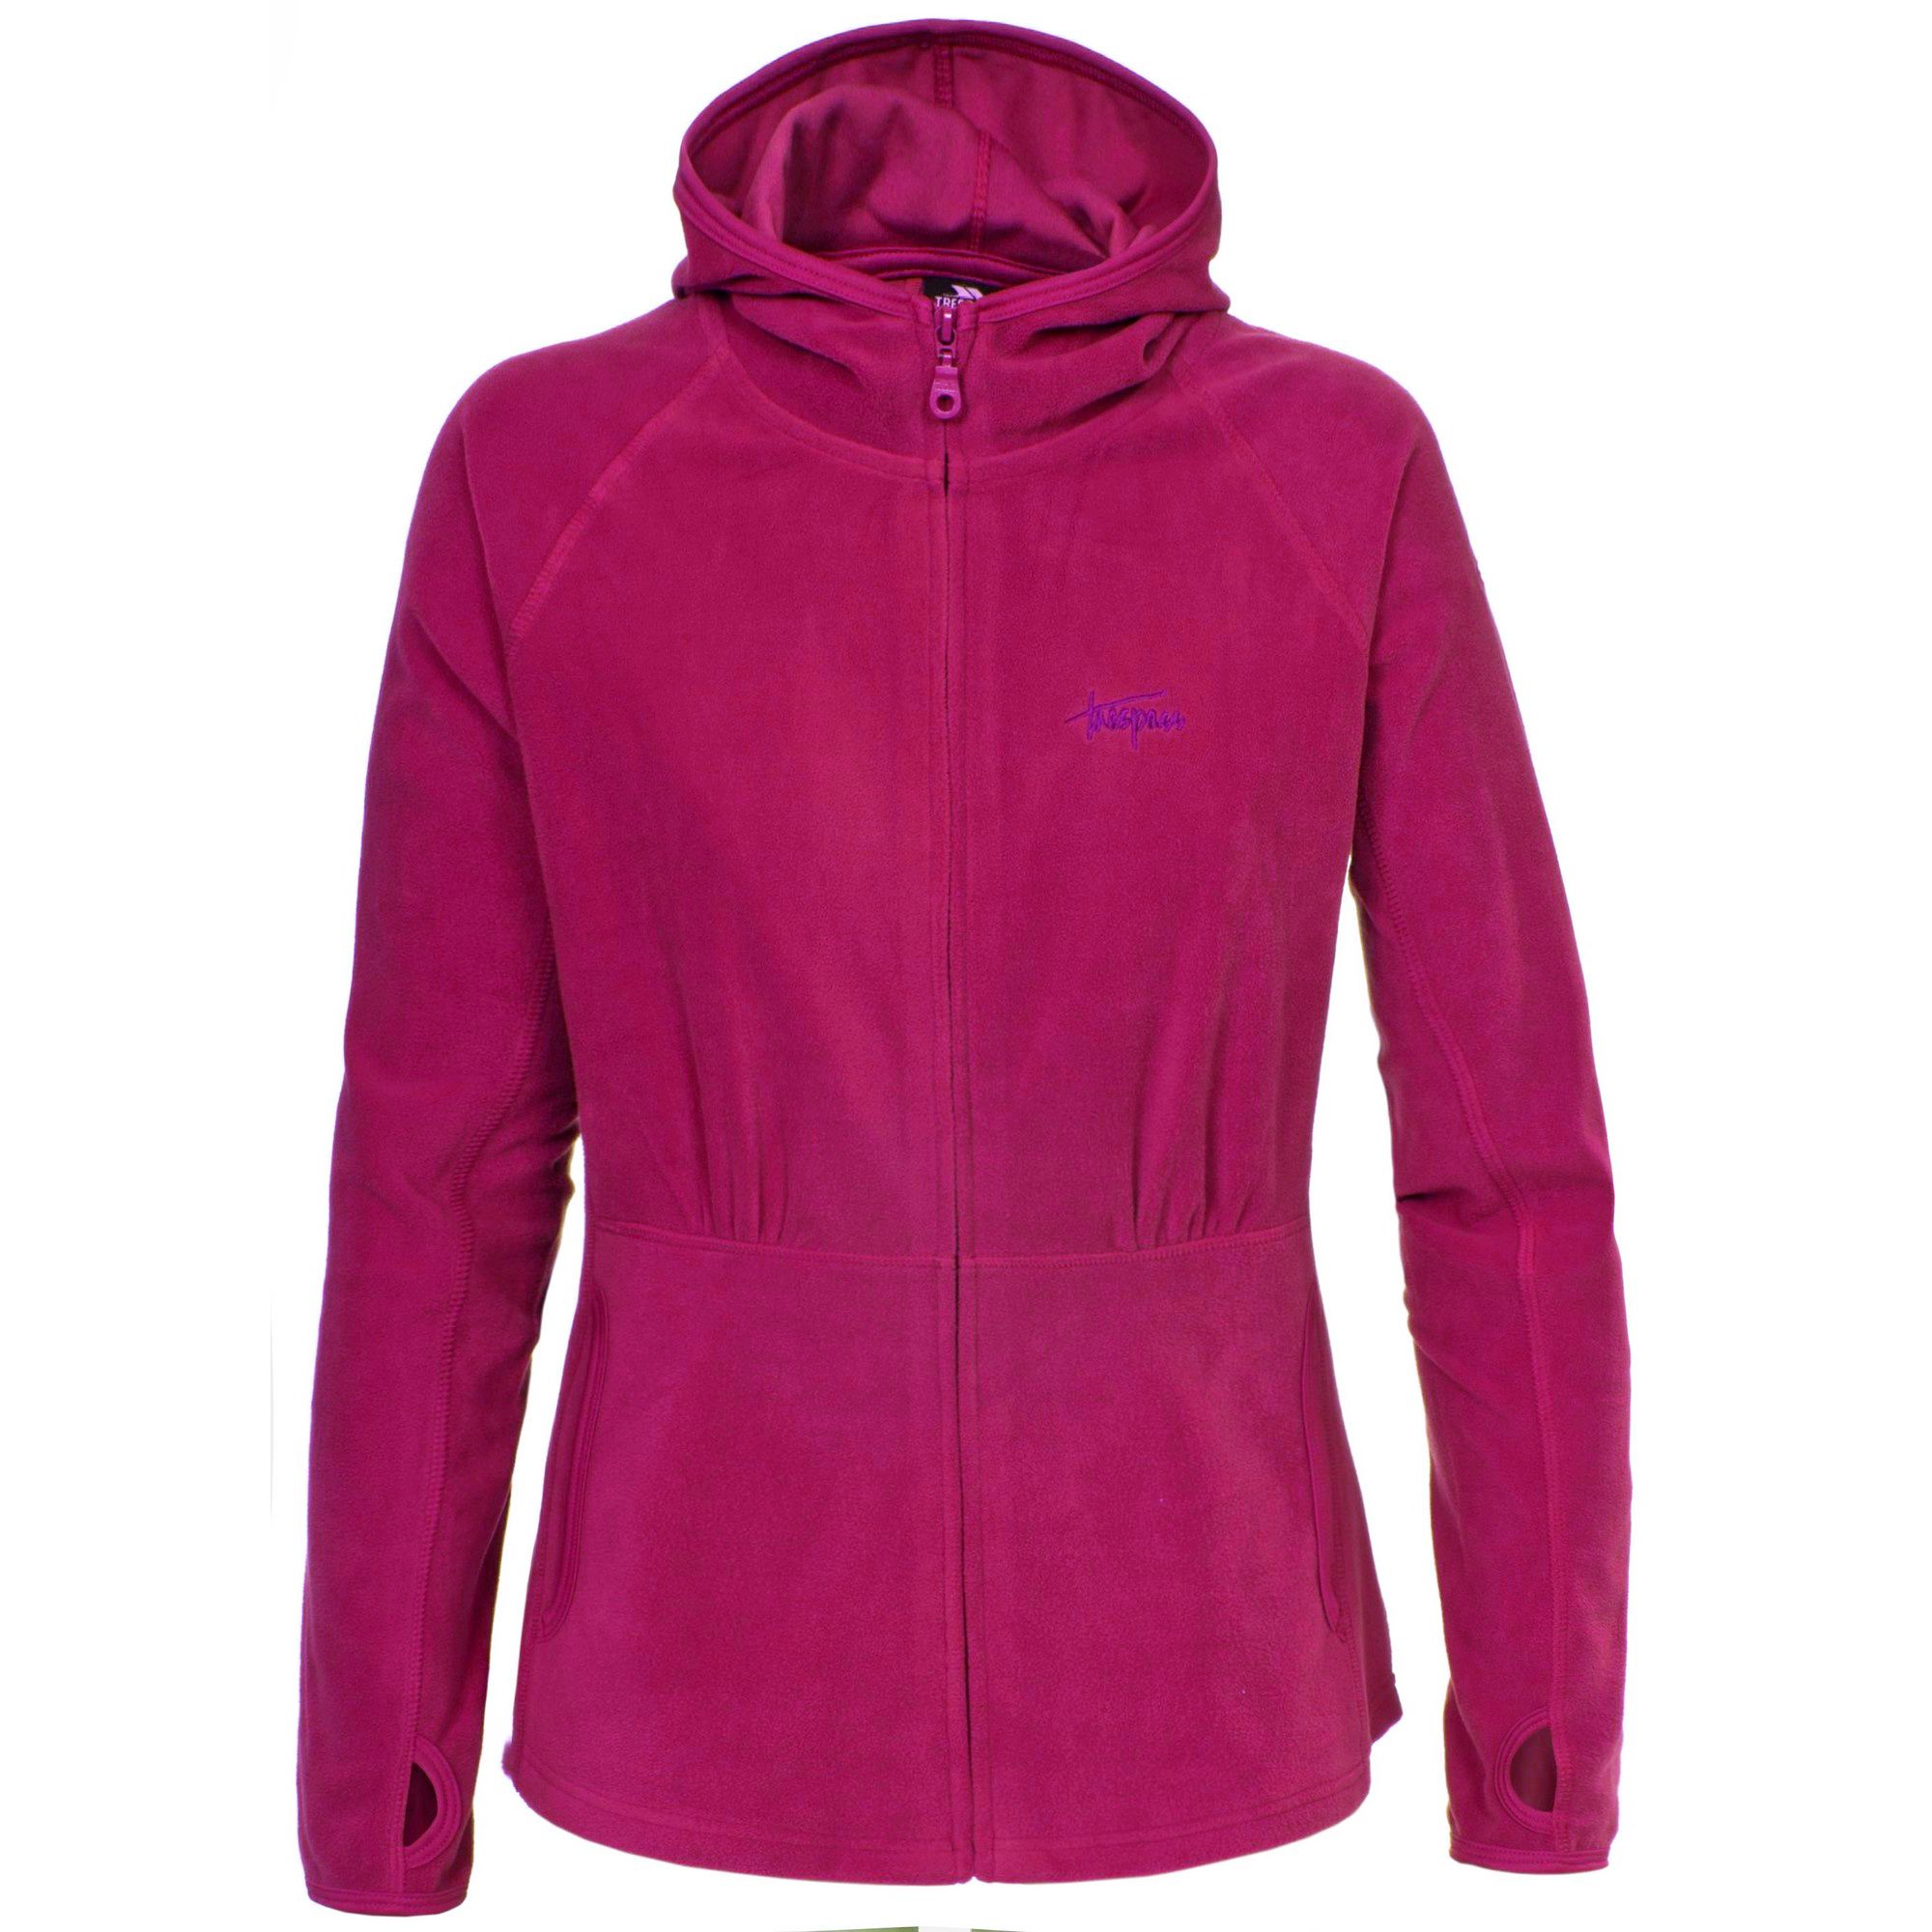 Ladies fleece jacket. 130gsm Airtrap fleece build to trap and hold onto body heat. Zip through front. Stretch binding at cuffs. 2 pockets on front. 100% Polyester. Trespass Womens Chest Sizing (approx): XS/8 - 32in/81cm, S/10 - 34in/86cm, M/12 - 36in/91.4cm, L/14 - 38in/96.5cm, XL/16 - 40in/101.5cm, XXL/18 - 42in/106.5cm.